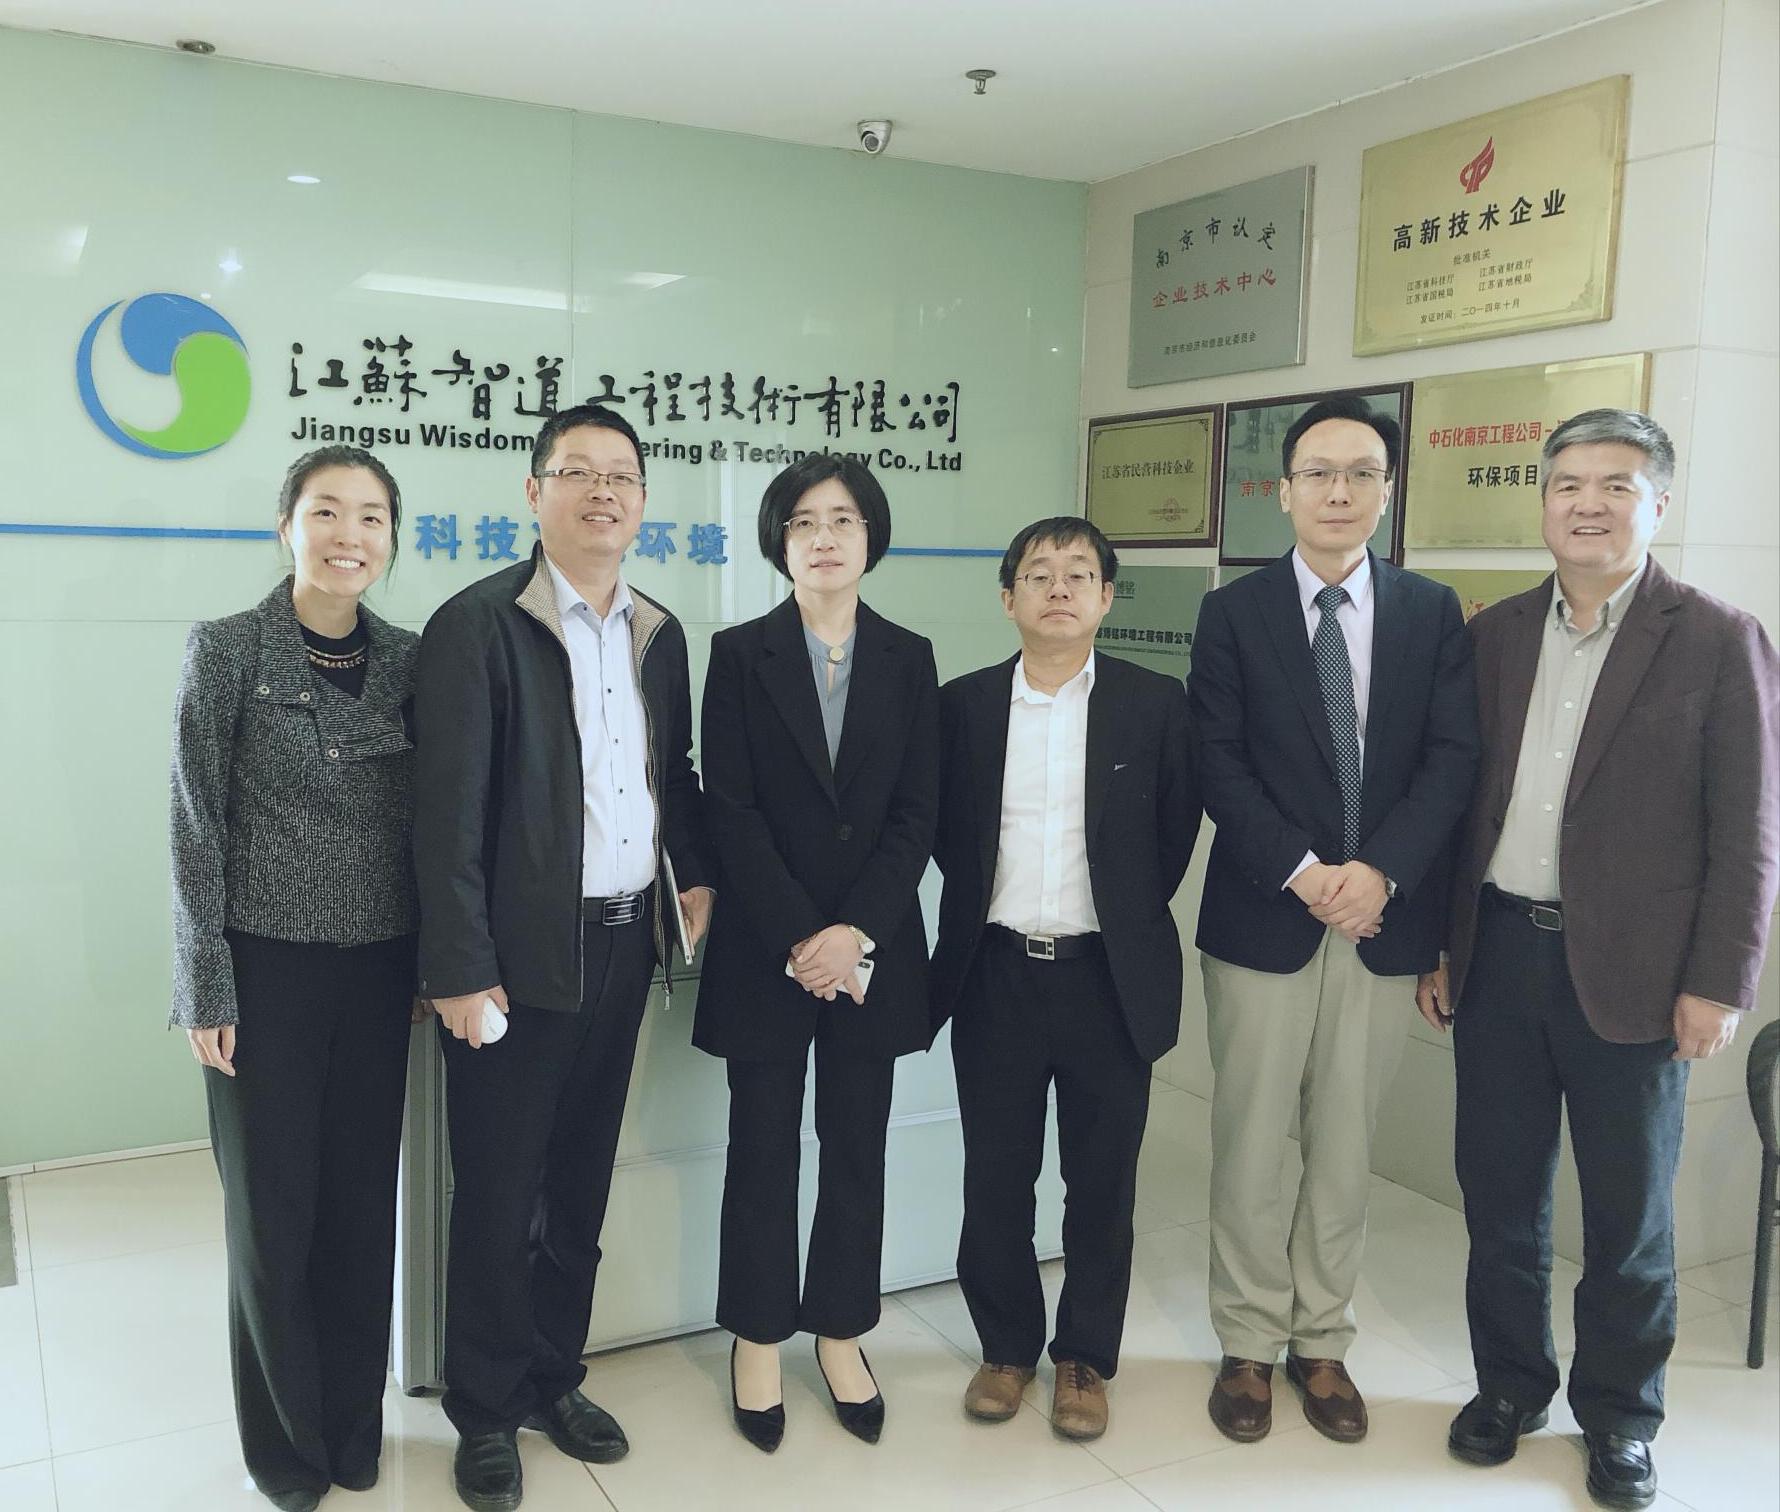 First from the right: Li Laisuo, CEO of Jiangsu Wisdom Engineering & Technology Co., Ltd. Second from the right: Wen Tao, General Manager of TSK Engineering China Co., Ltd. Third from the right: Tatsuya Mameda, Senior Engineer of TSK Engineering China Co.